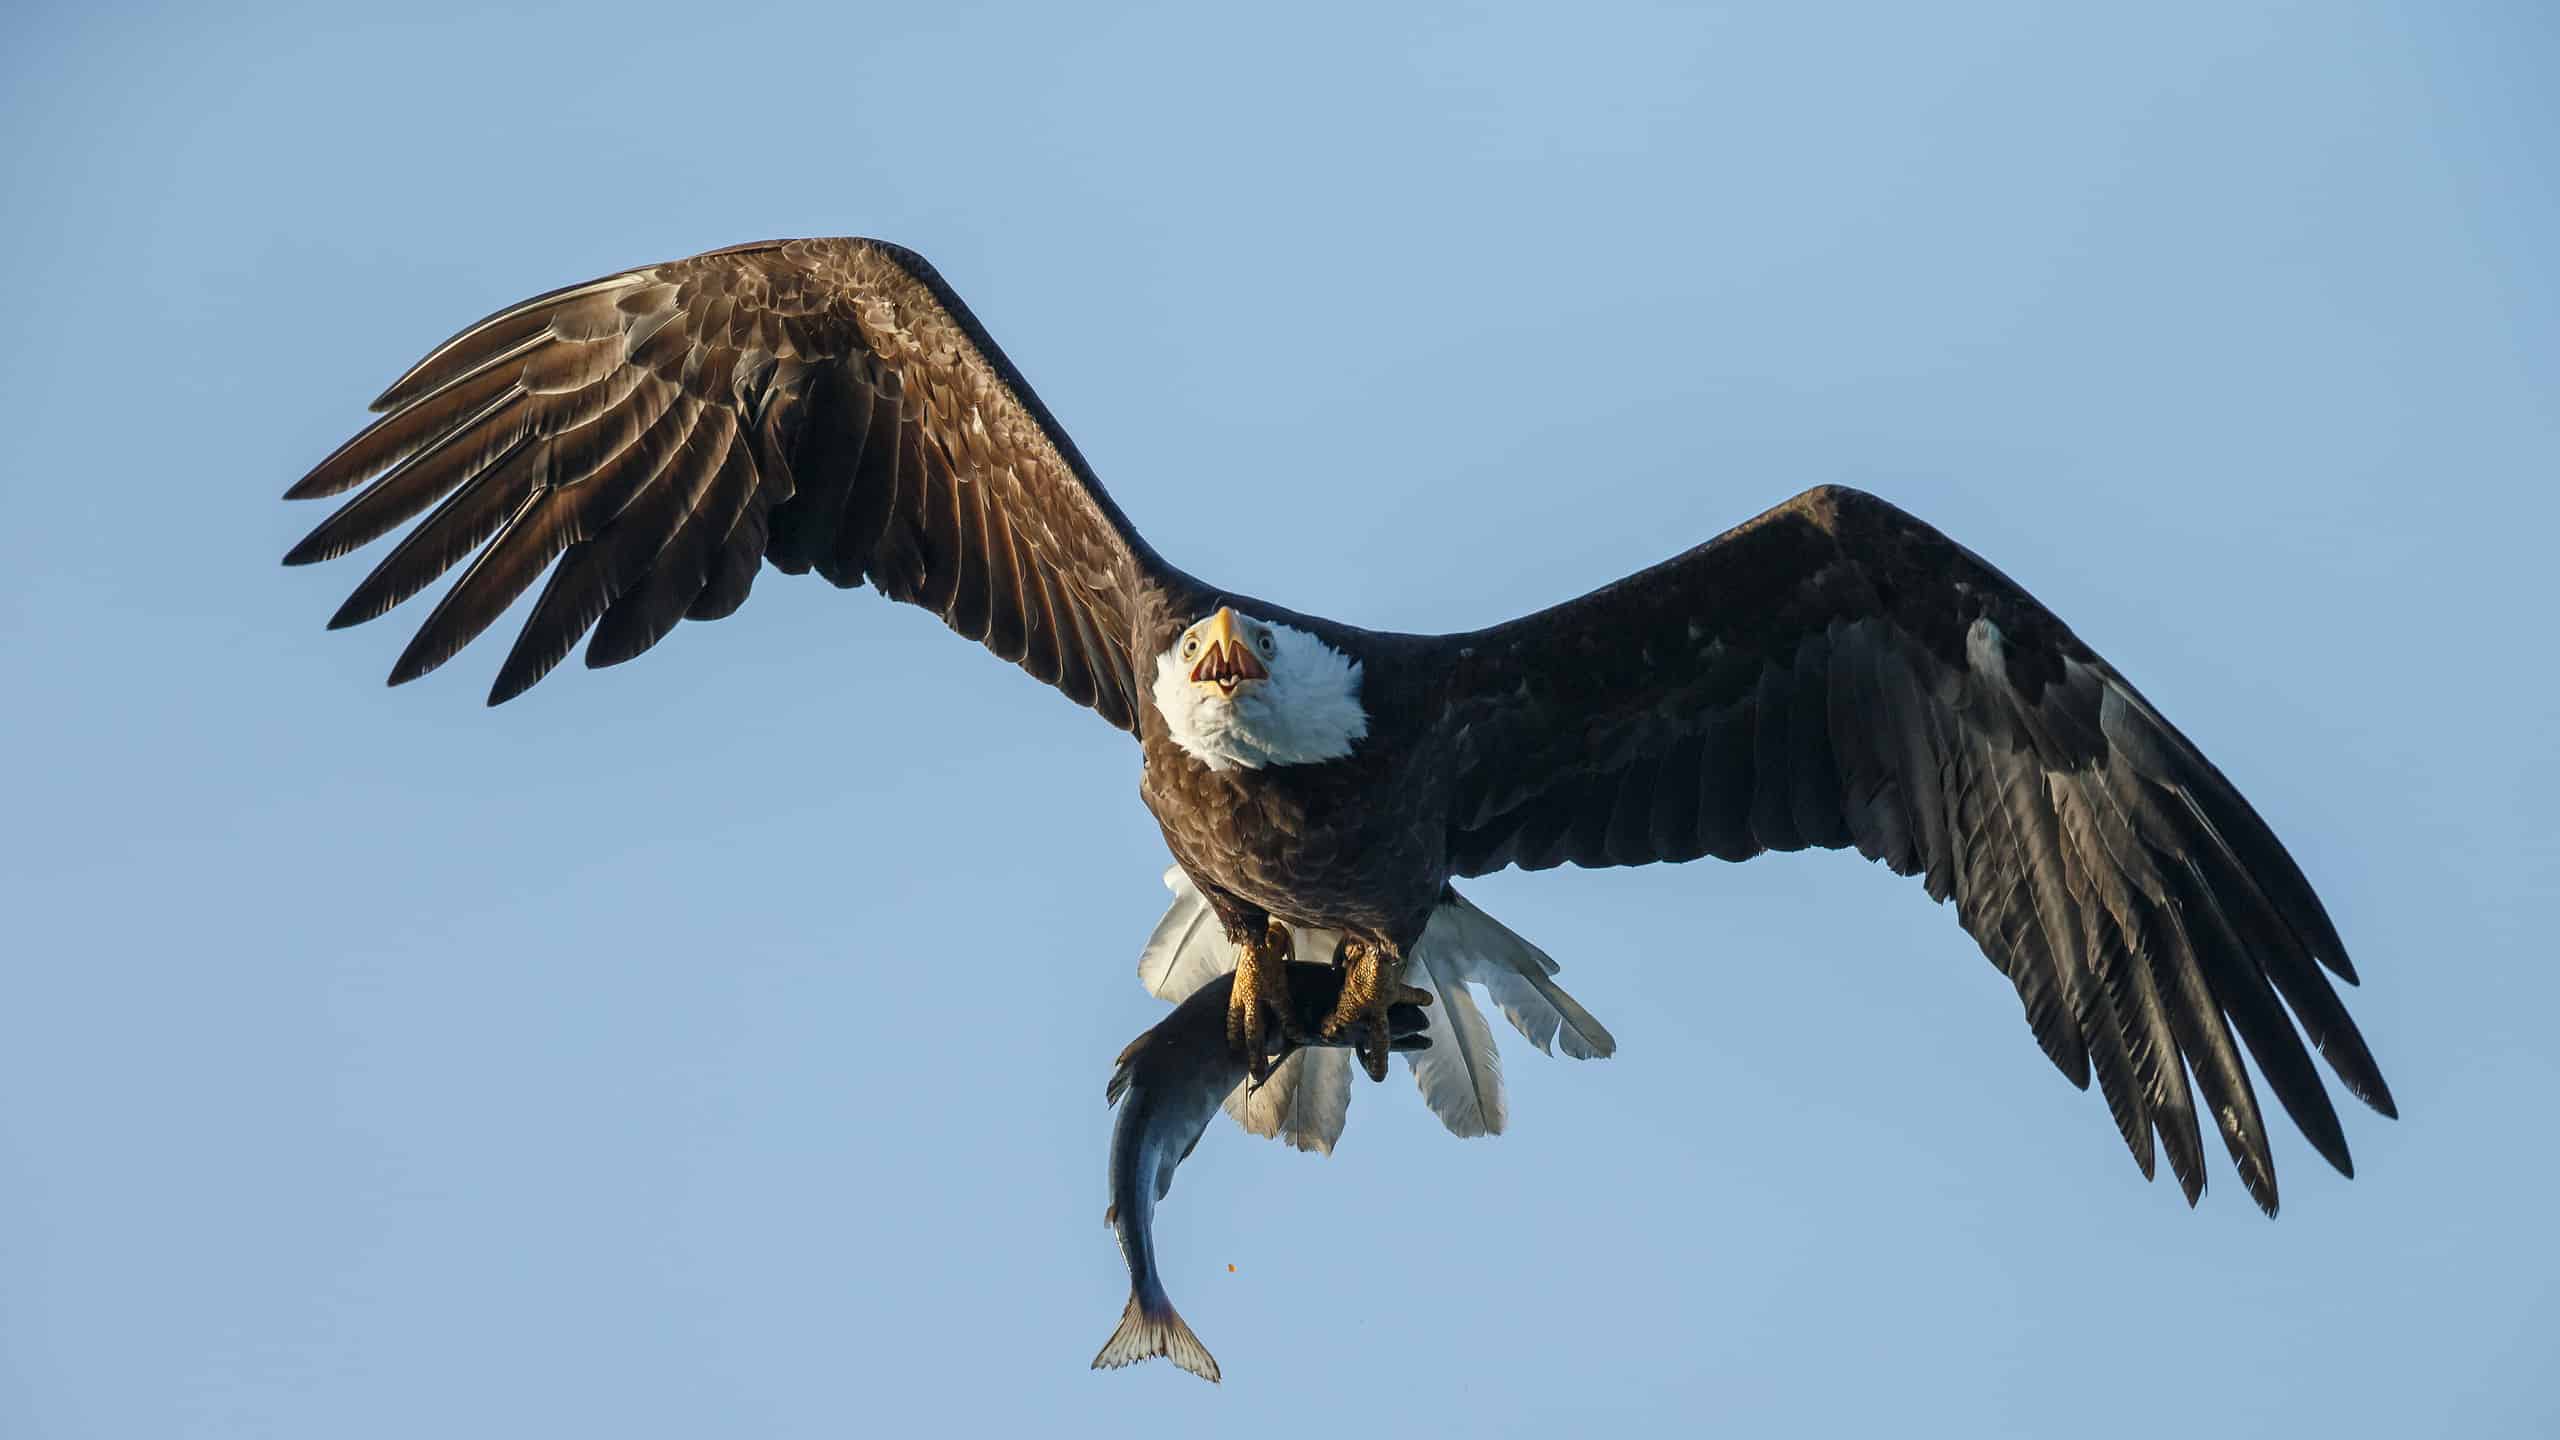 Bald eagle in flight with a sockeye salmon in his claws